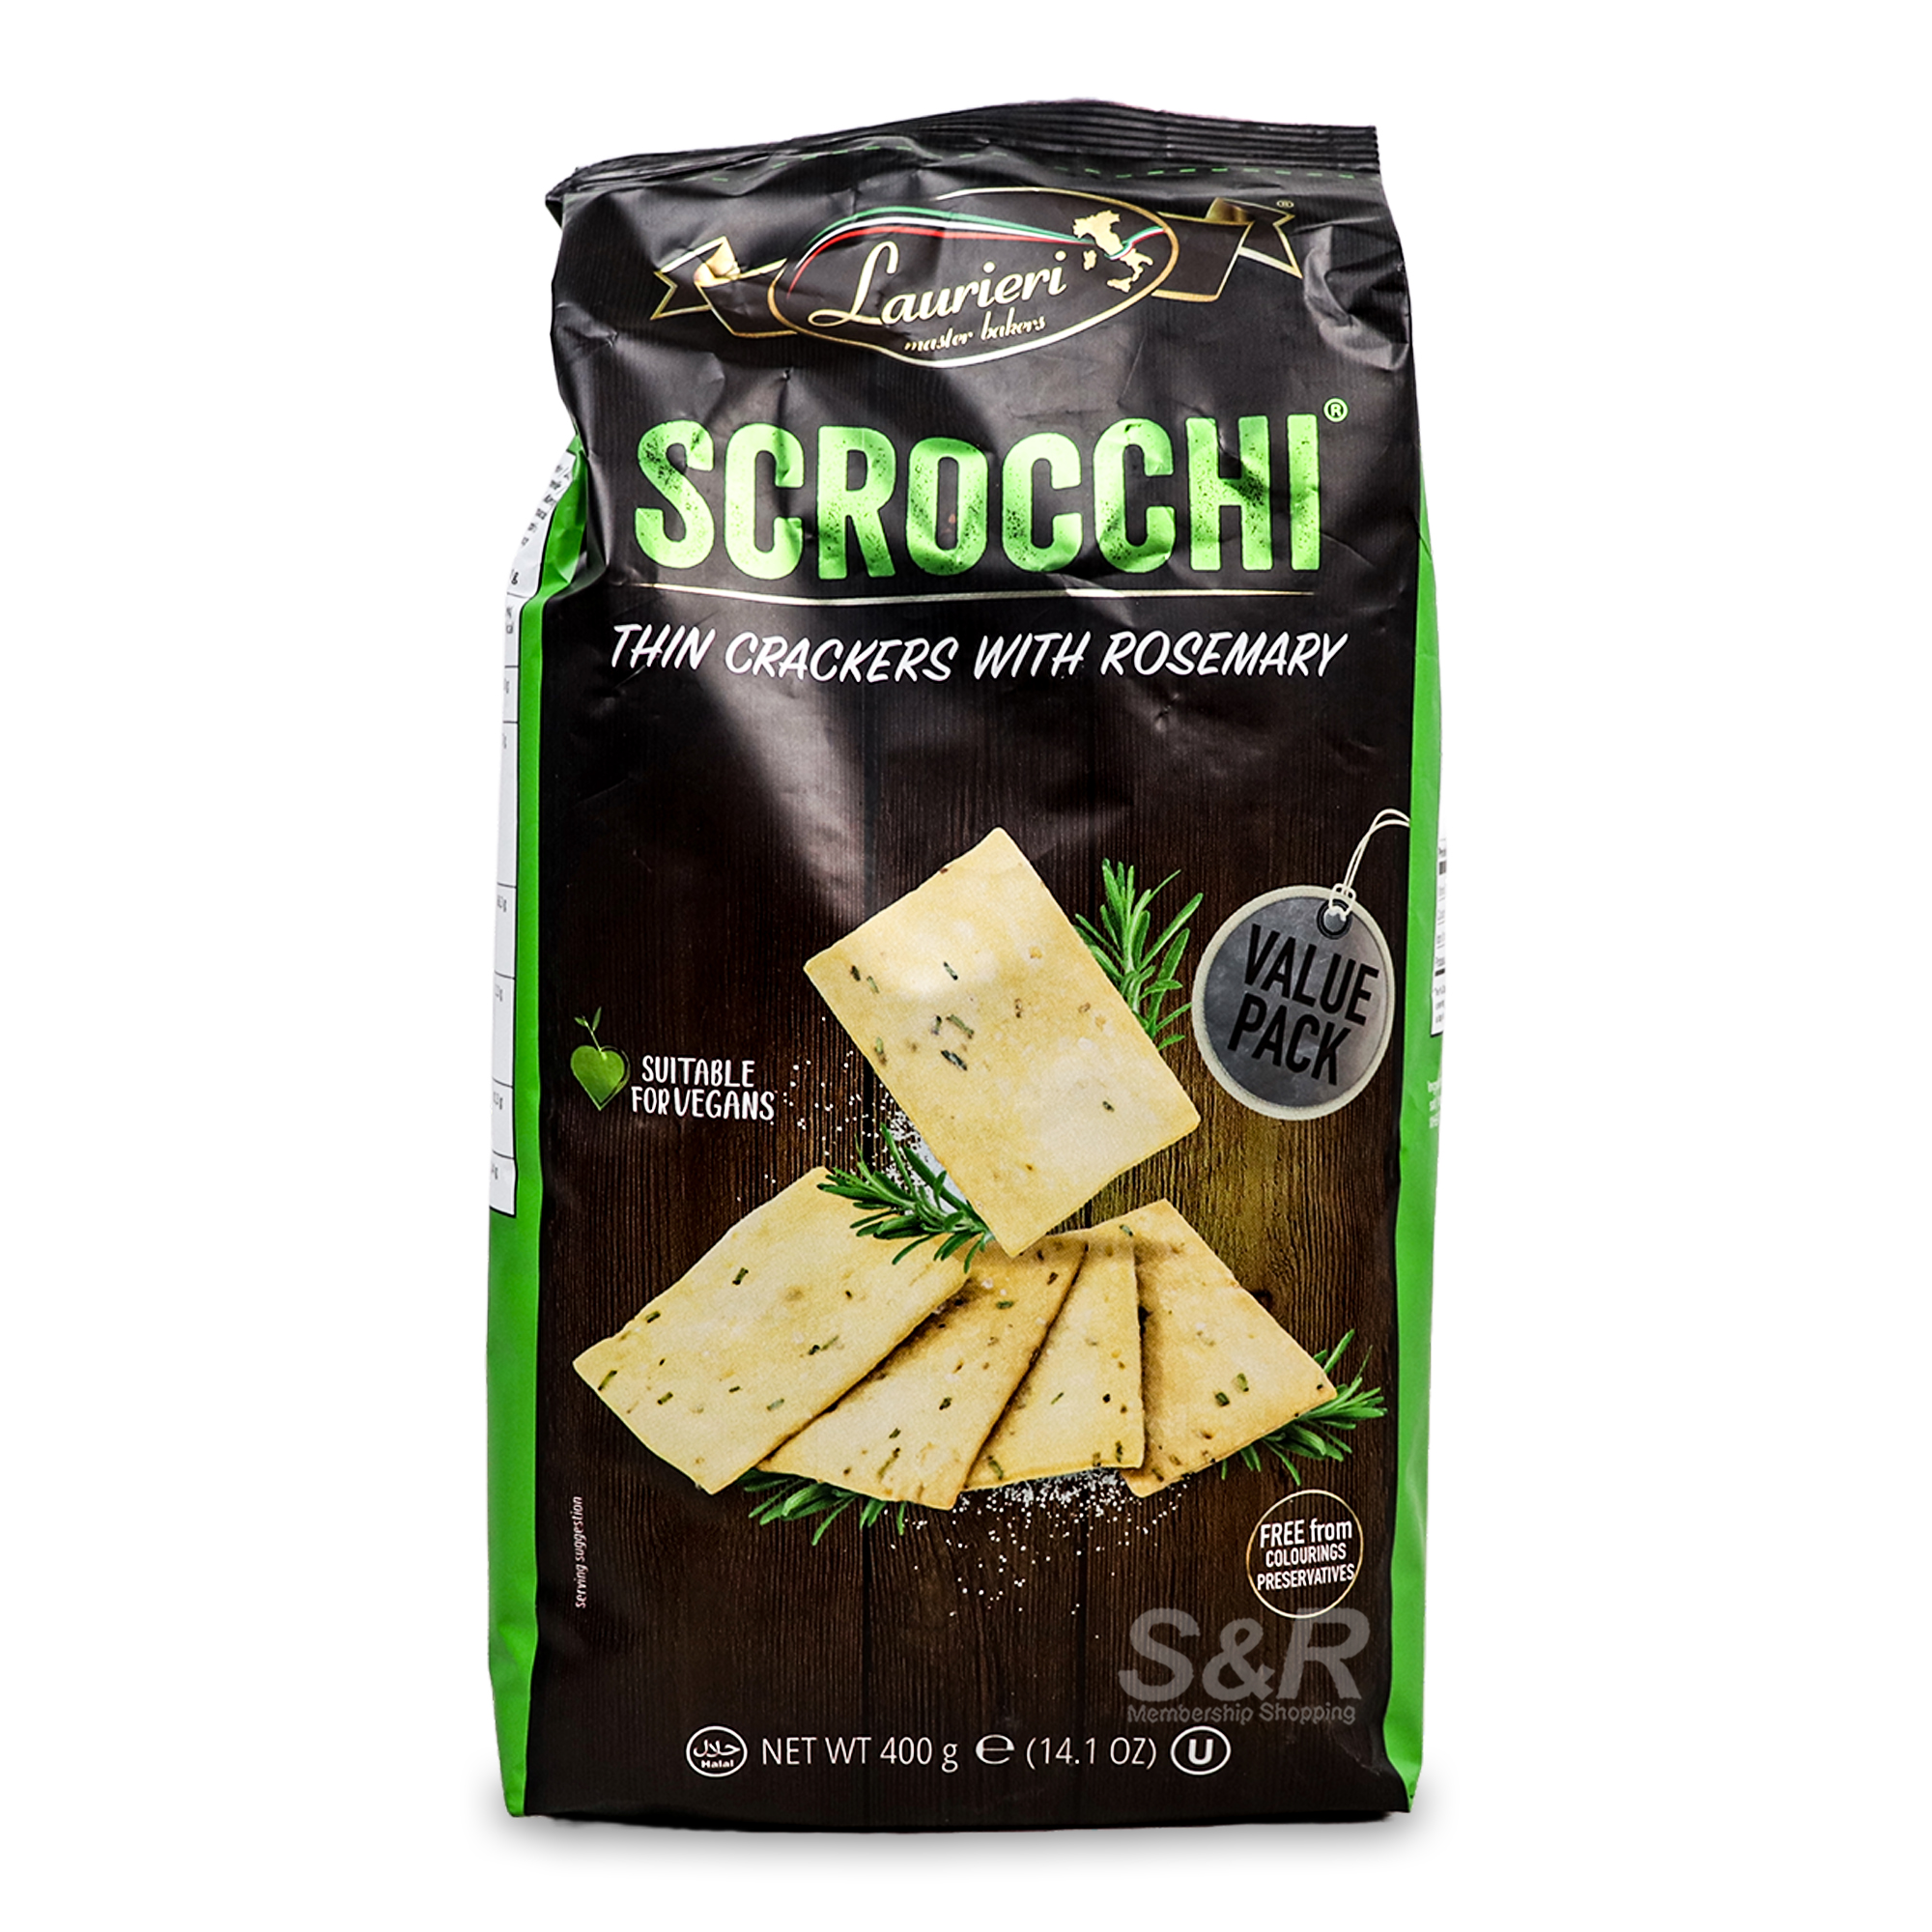 Laurieri Scrocchi Thin Crackers With Rosemary 400g